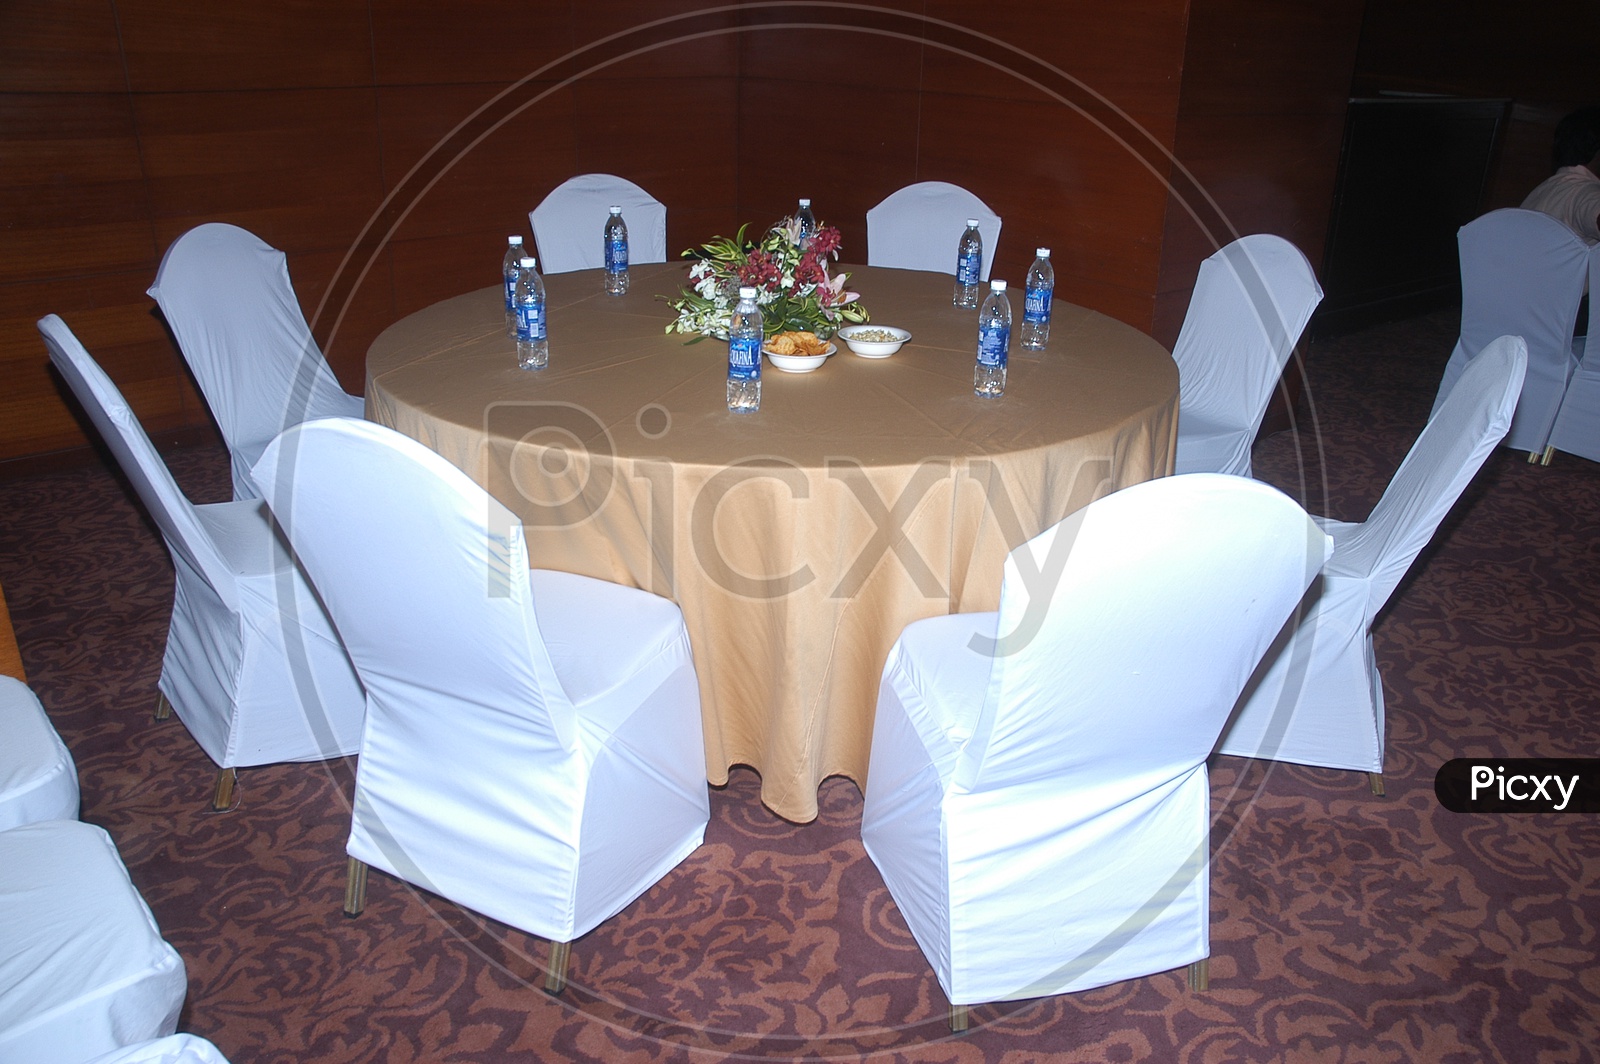 A Round Table With Chairs and Water bottles On The Table